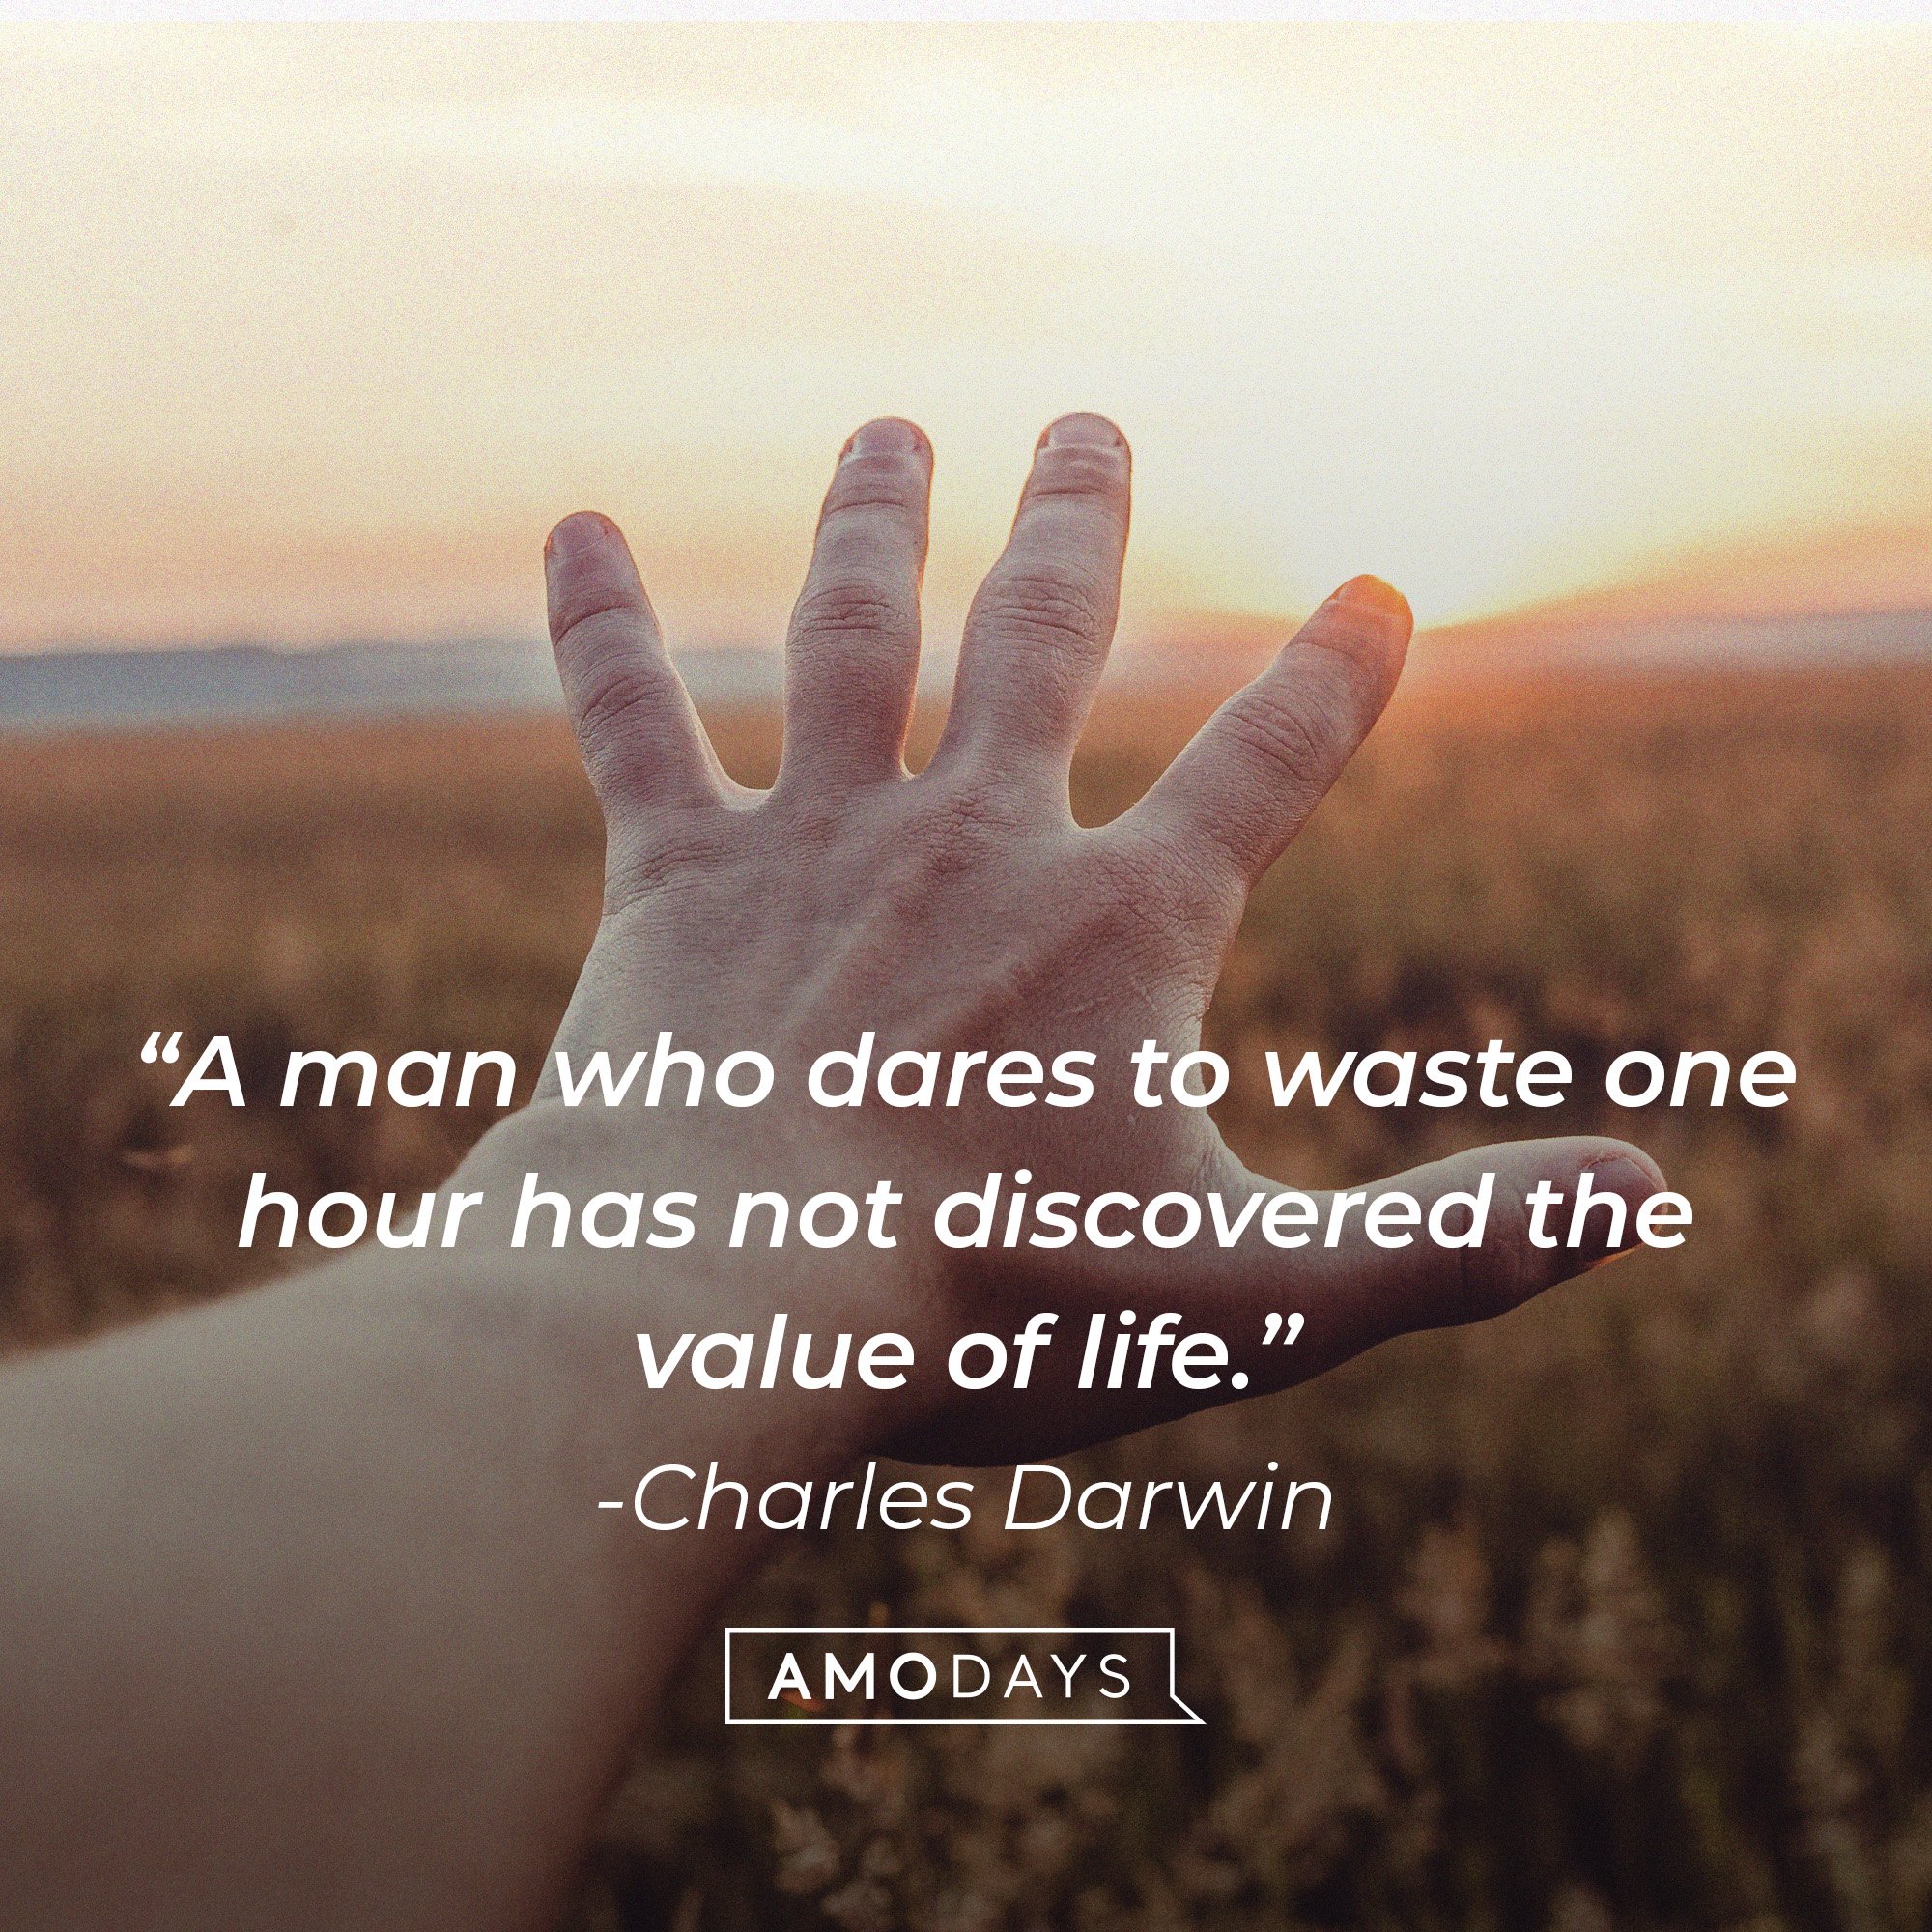 Charles Darwin's quote: “A man who dares to waste one hour has not discovered the value of life.” | Image: AmoDays 